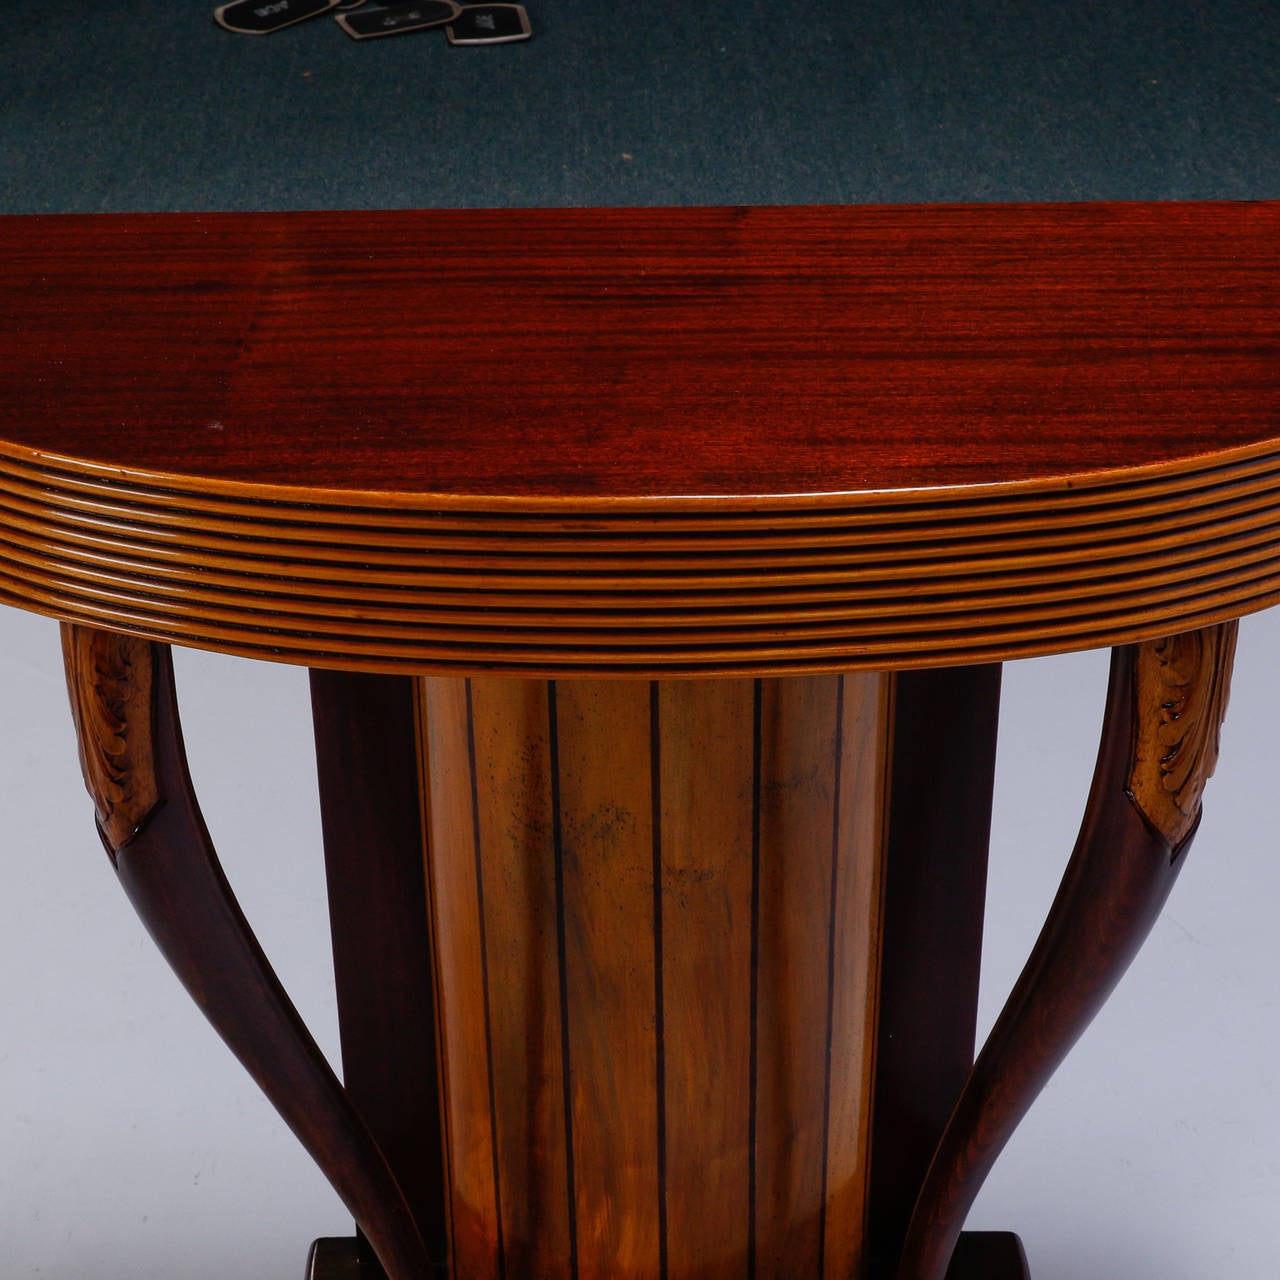 Wood Art Deco Demilune Console with Reeded Edge